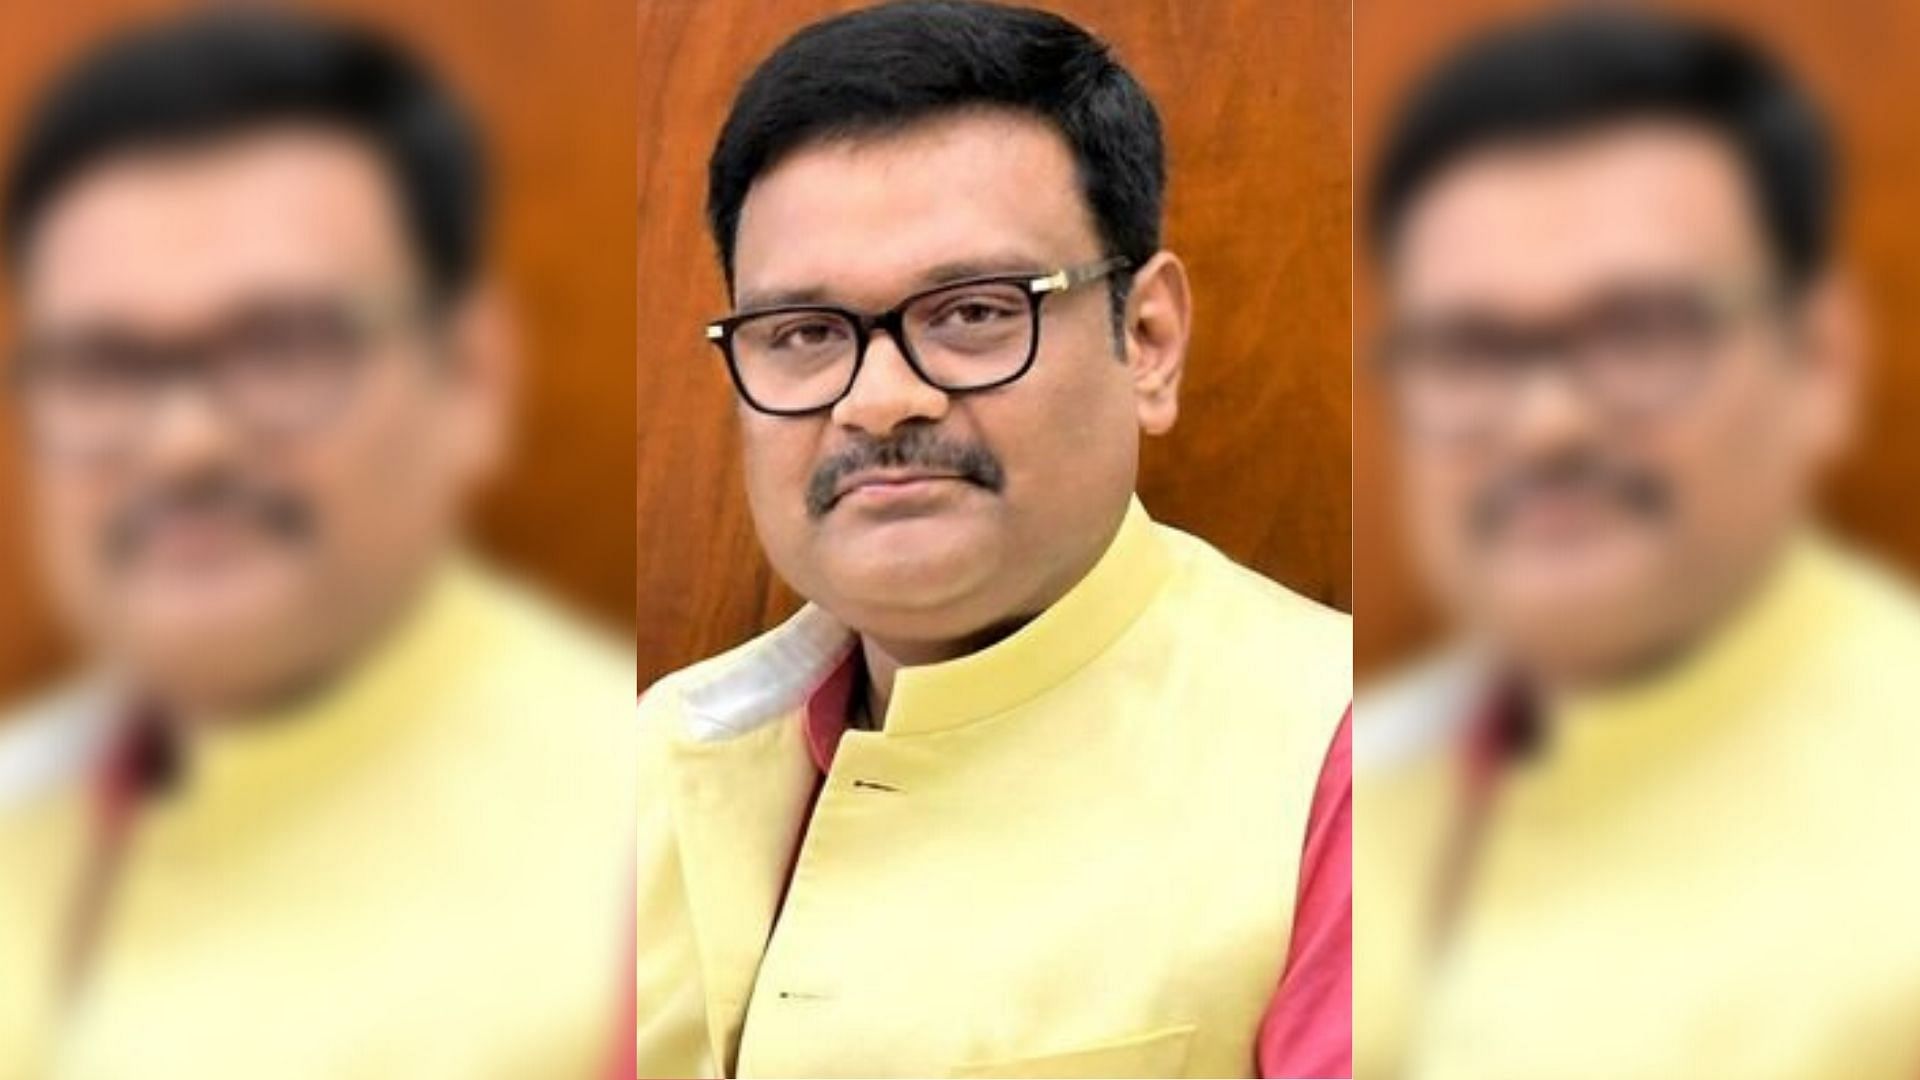 A state government official on Tuesday, 7 April, accused the BJP MP Subrat Pathak from Uttar Pradesh’s Kannauj of assaulting him.